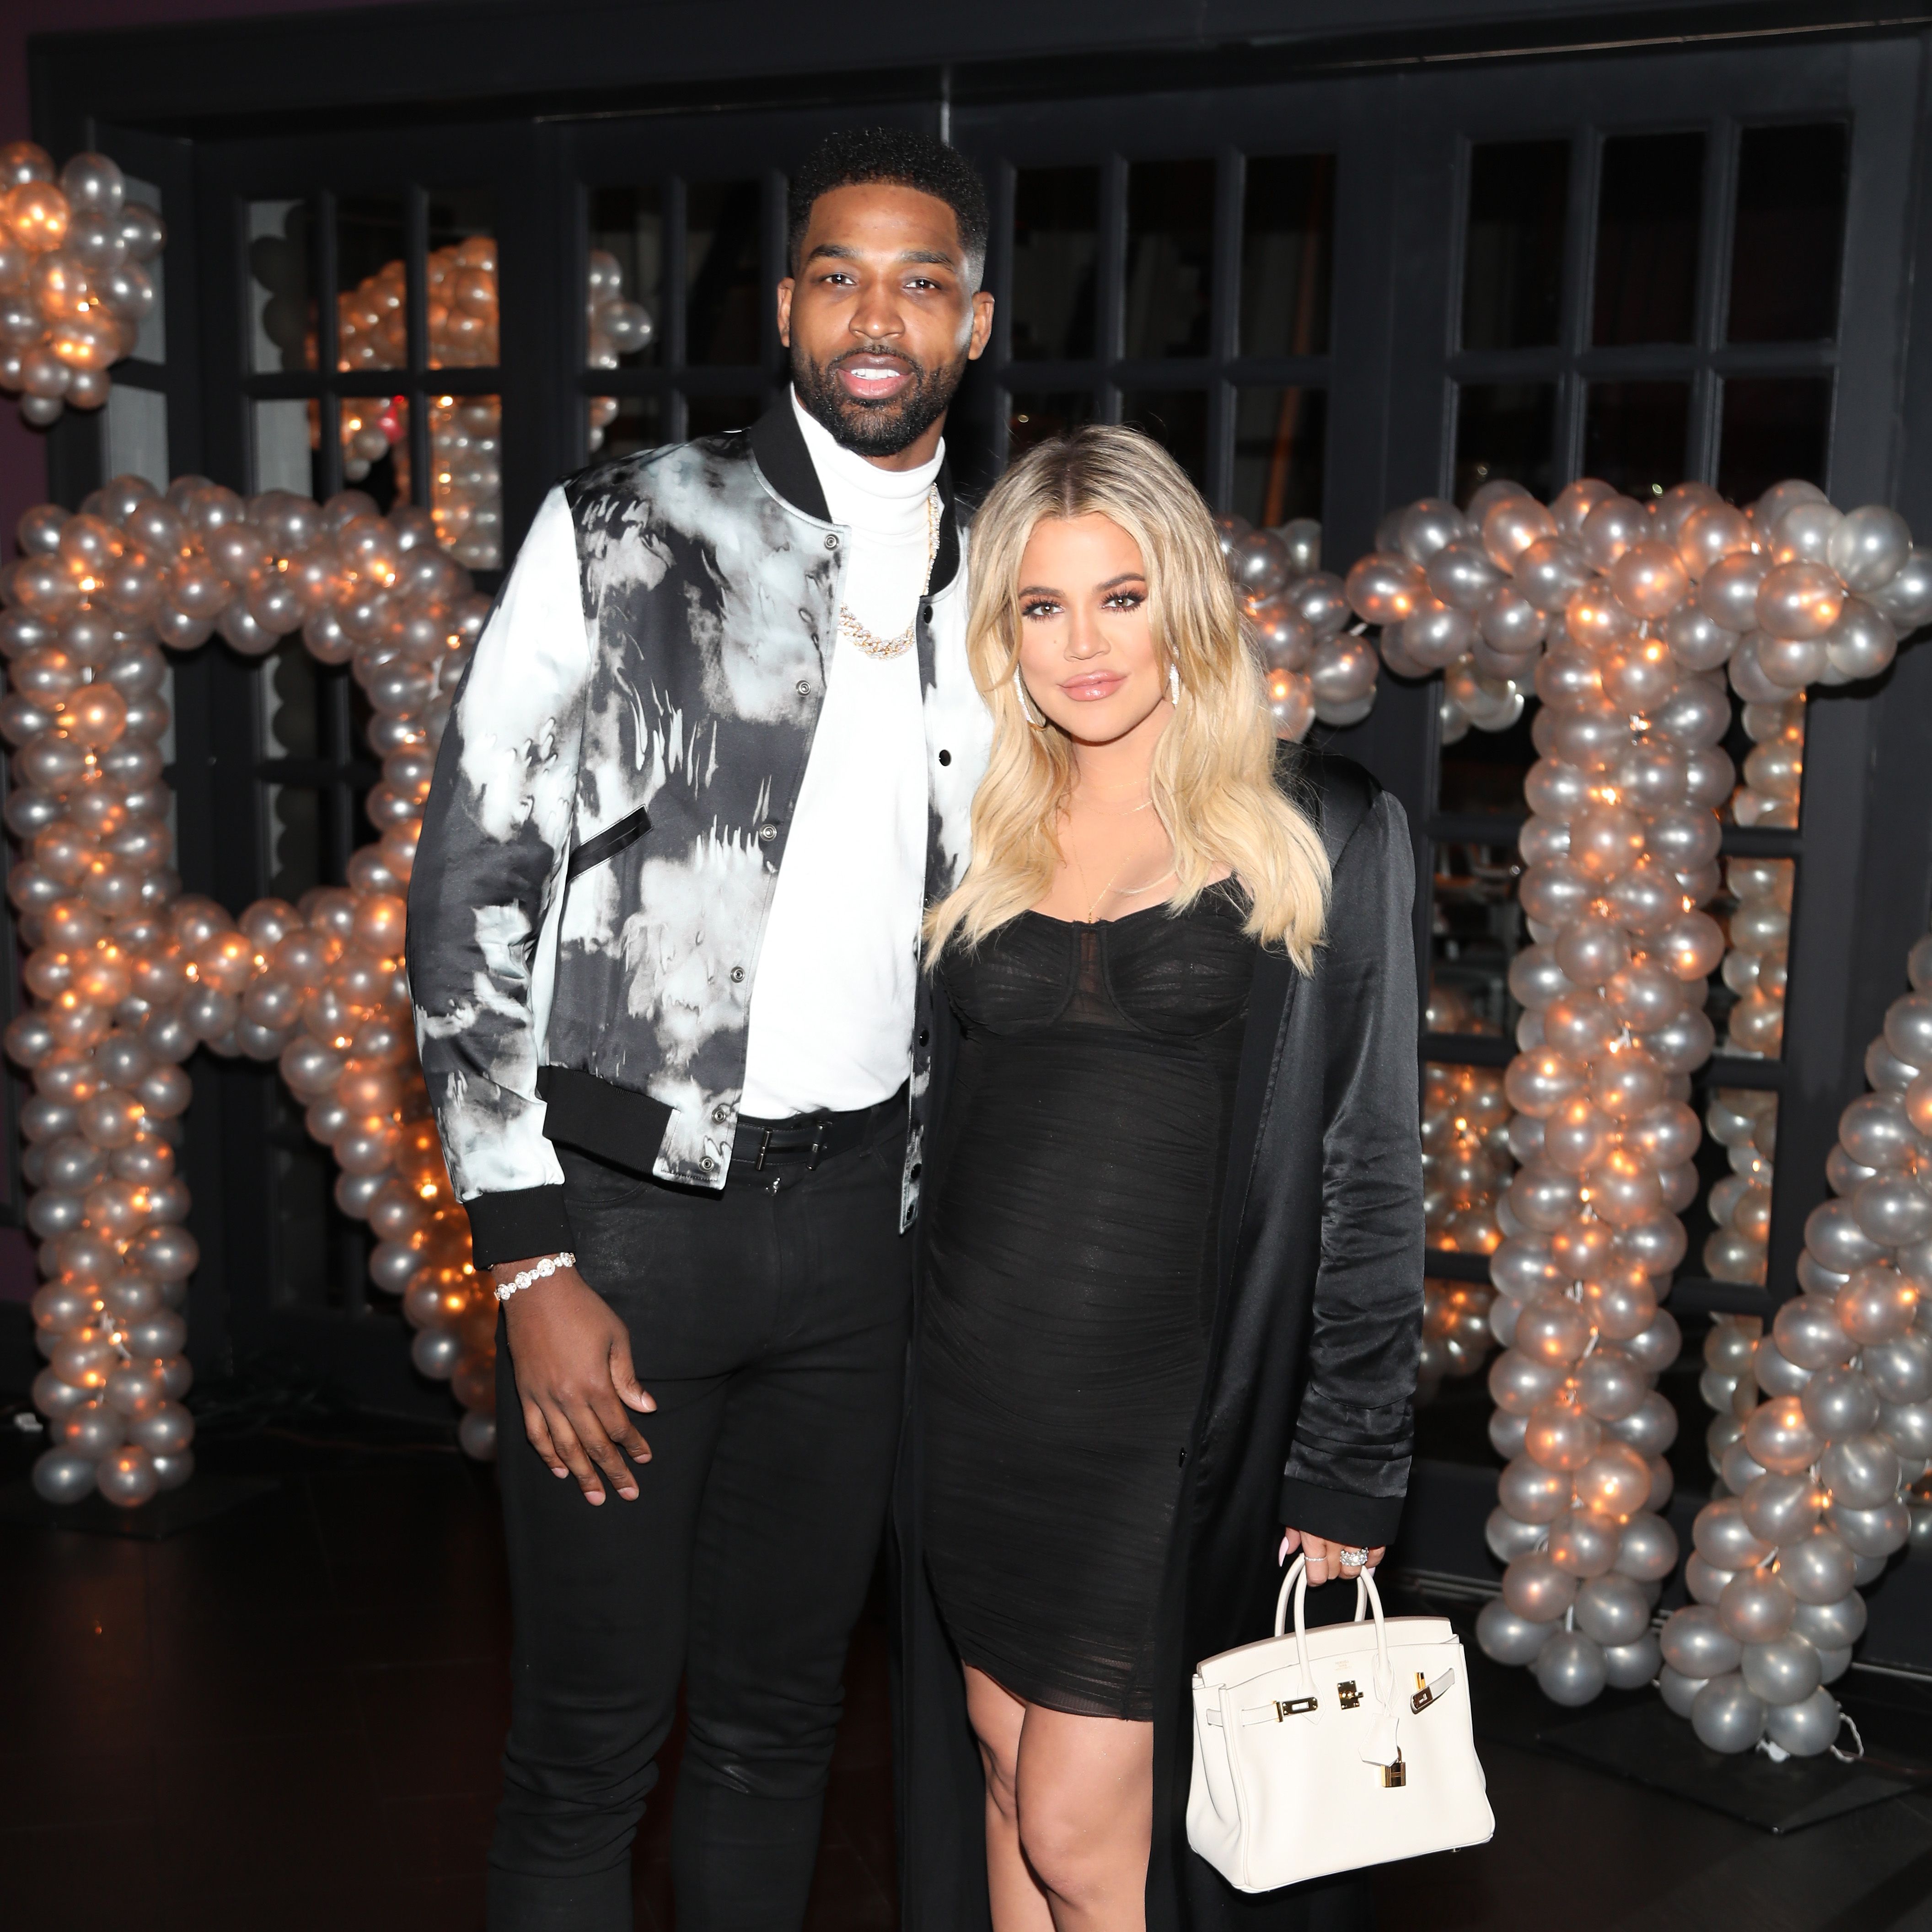 Khloé Kardashian Is Reportedly Expecting Second Child with Tristan Thompson via Surrogate